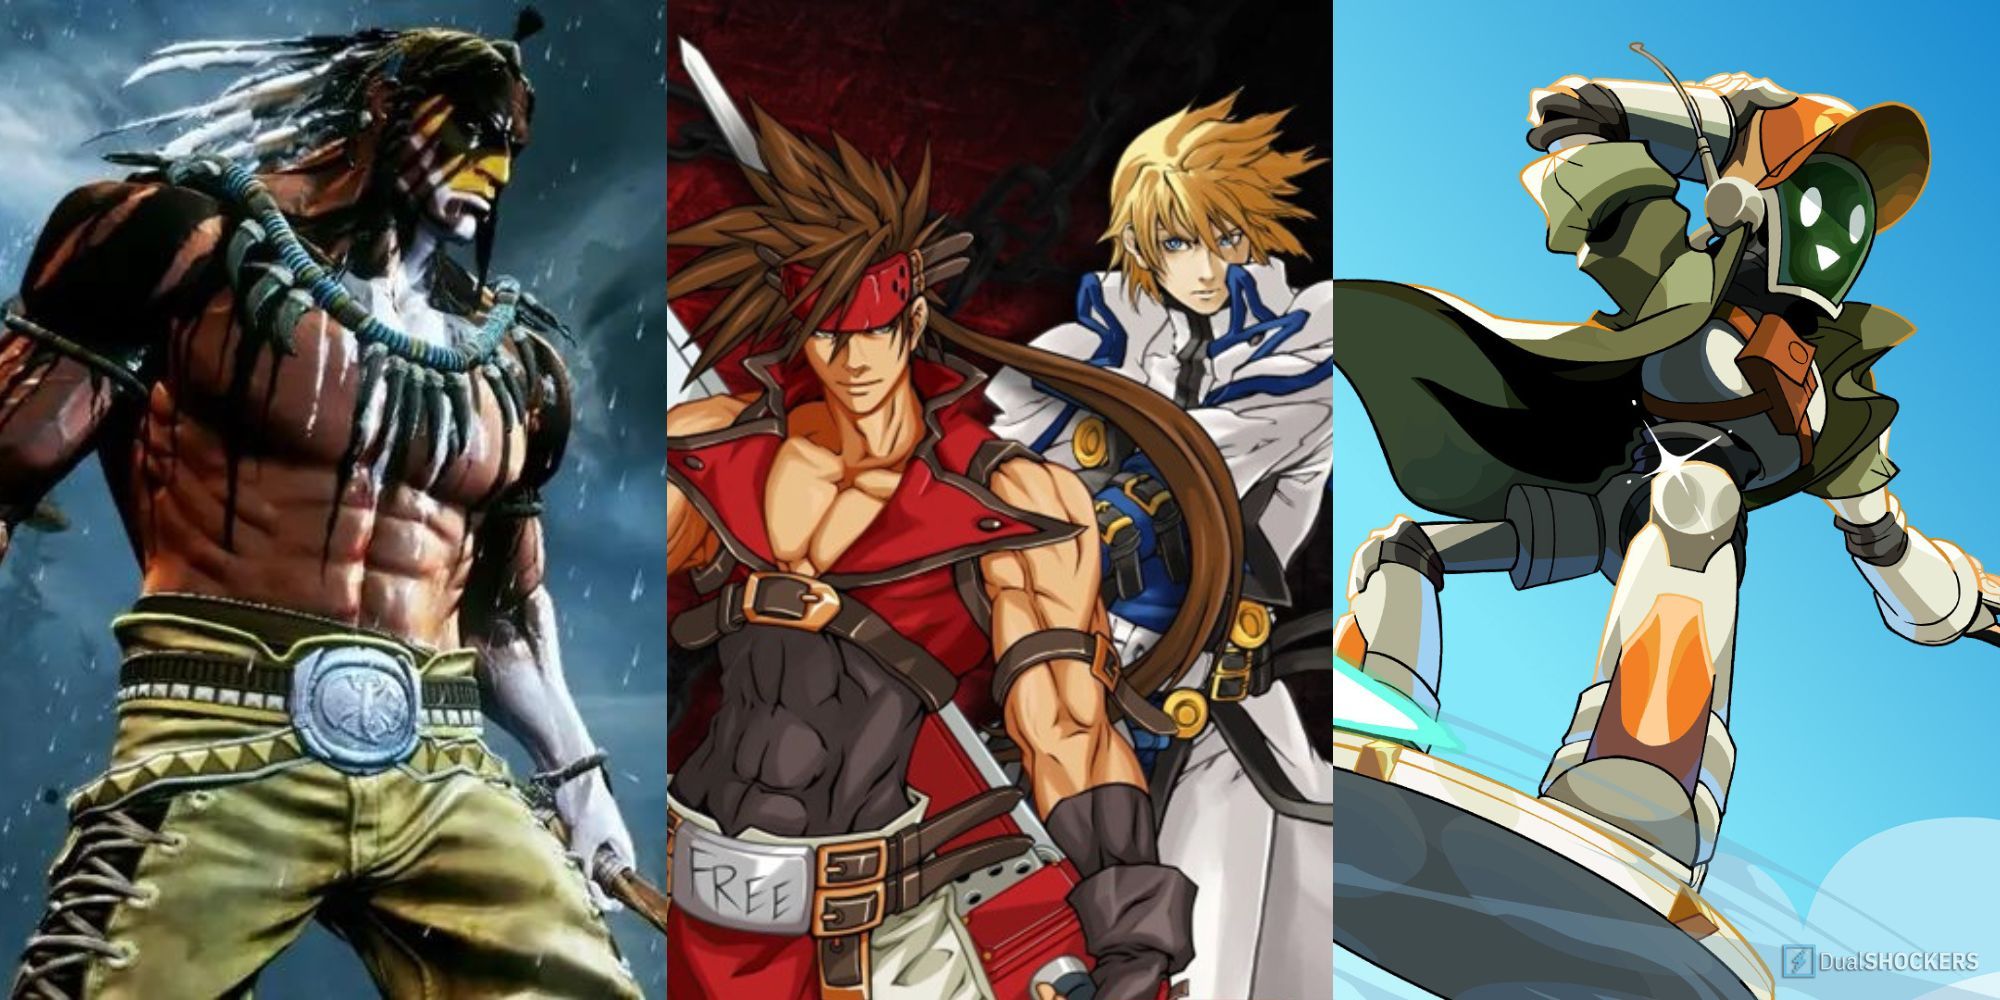 Fighting games feature image featuring Killer Instinct, Brawlhalla, and Guilty Gear